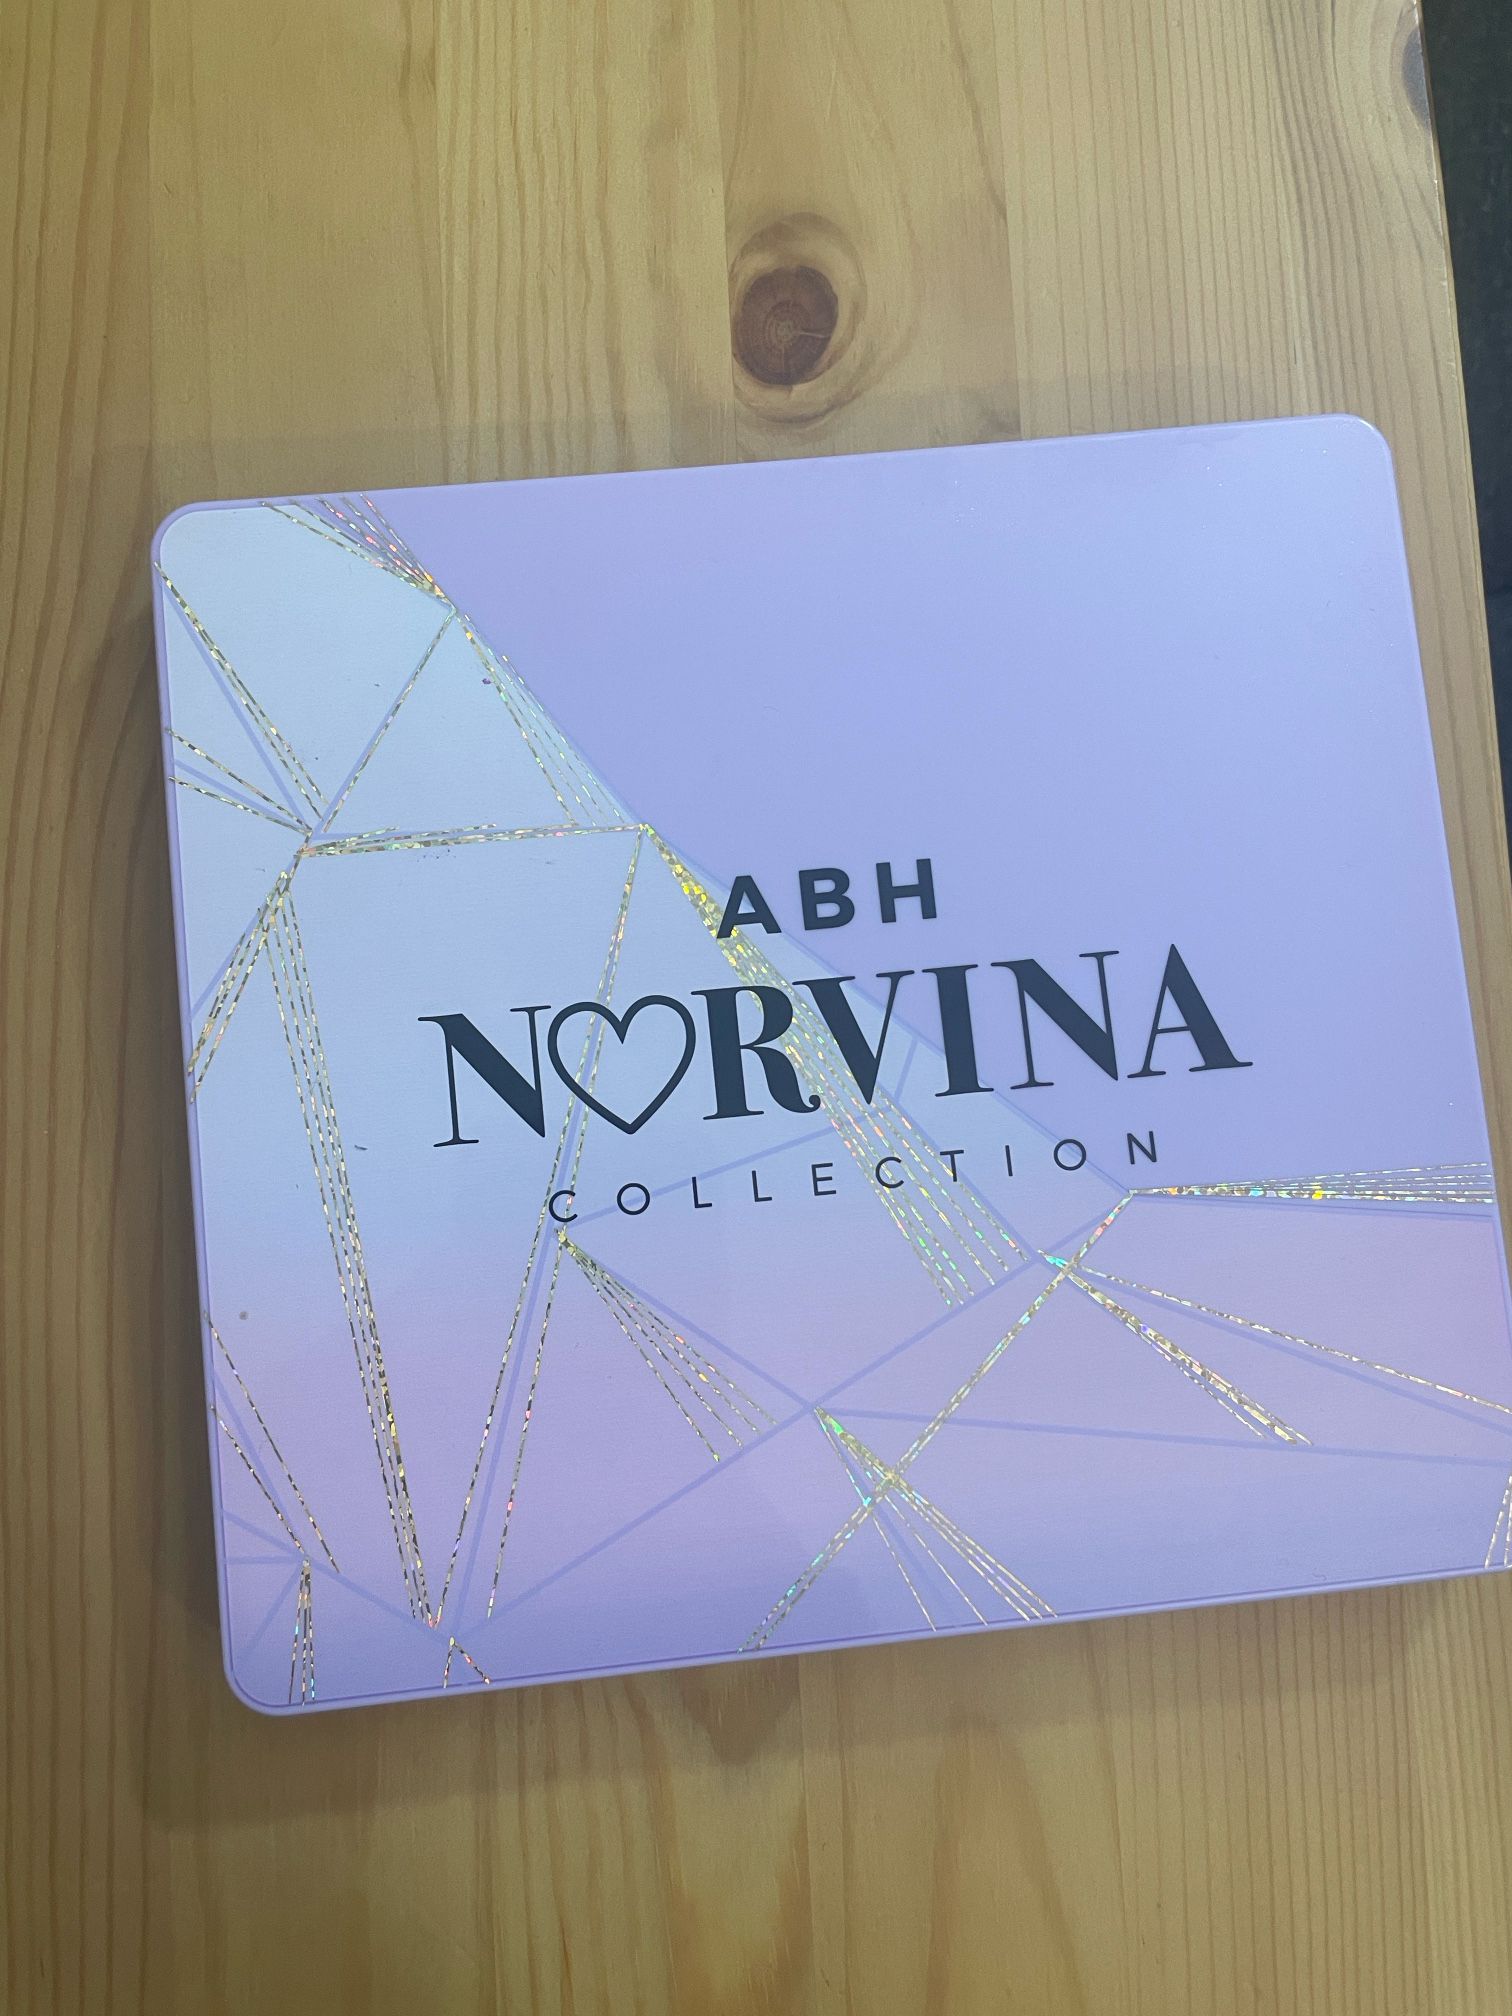 ABH Norvina Collection Eyeshadow Palette 